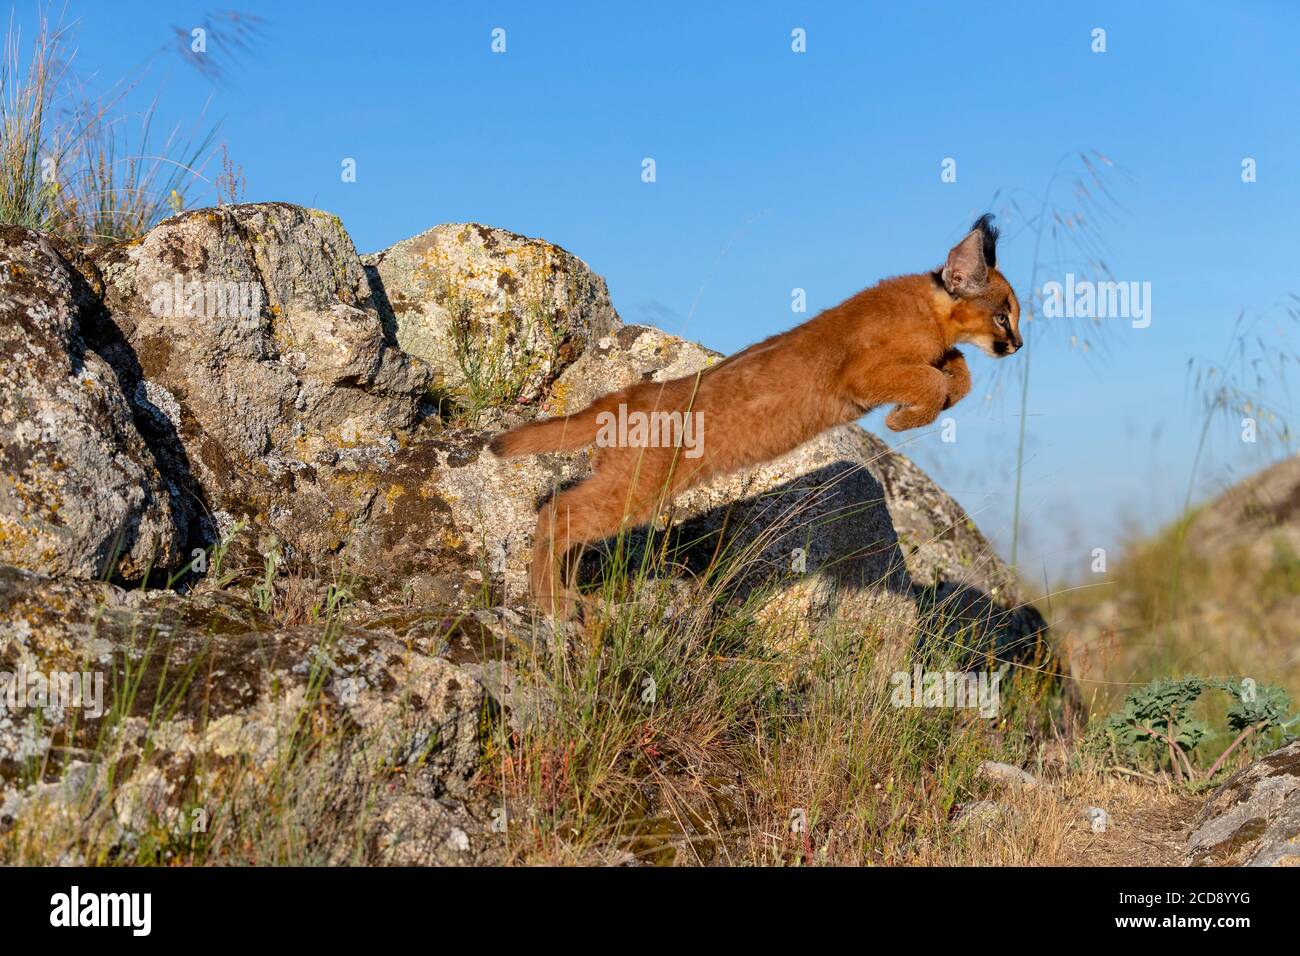 Caracal (Caracal caracal) , Occurs in Africa and Asia, Young animal 9 weeks old, jumping, Captive Stock Photo